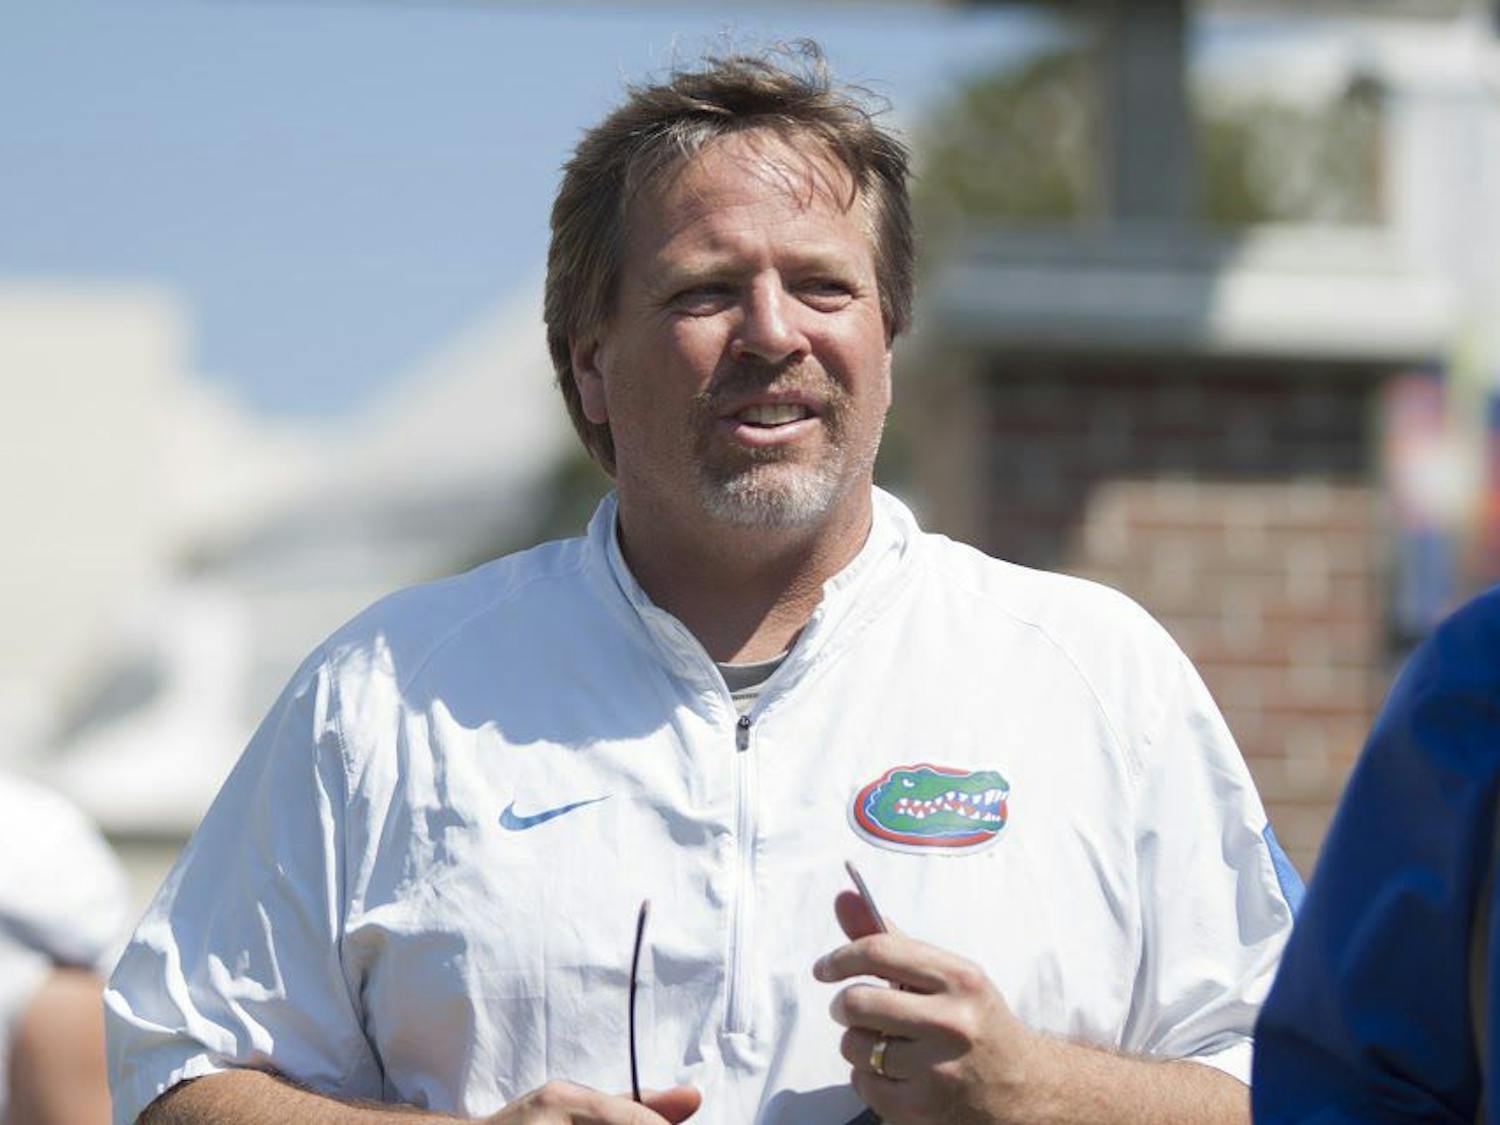 Florida head coach Jim McElwain looks on during a spring practice at the Sanders Practice Field on March 22, 2017.&nbsp;